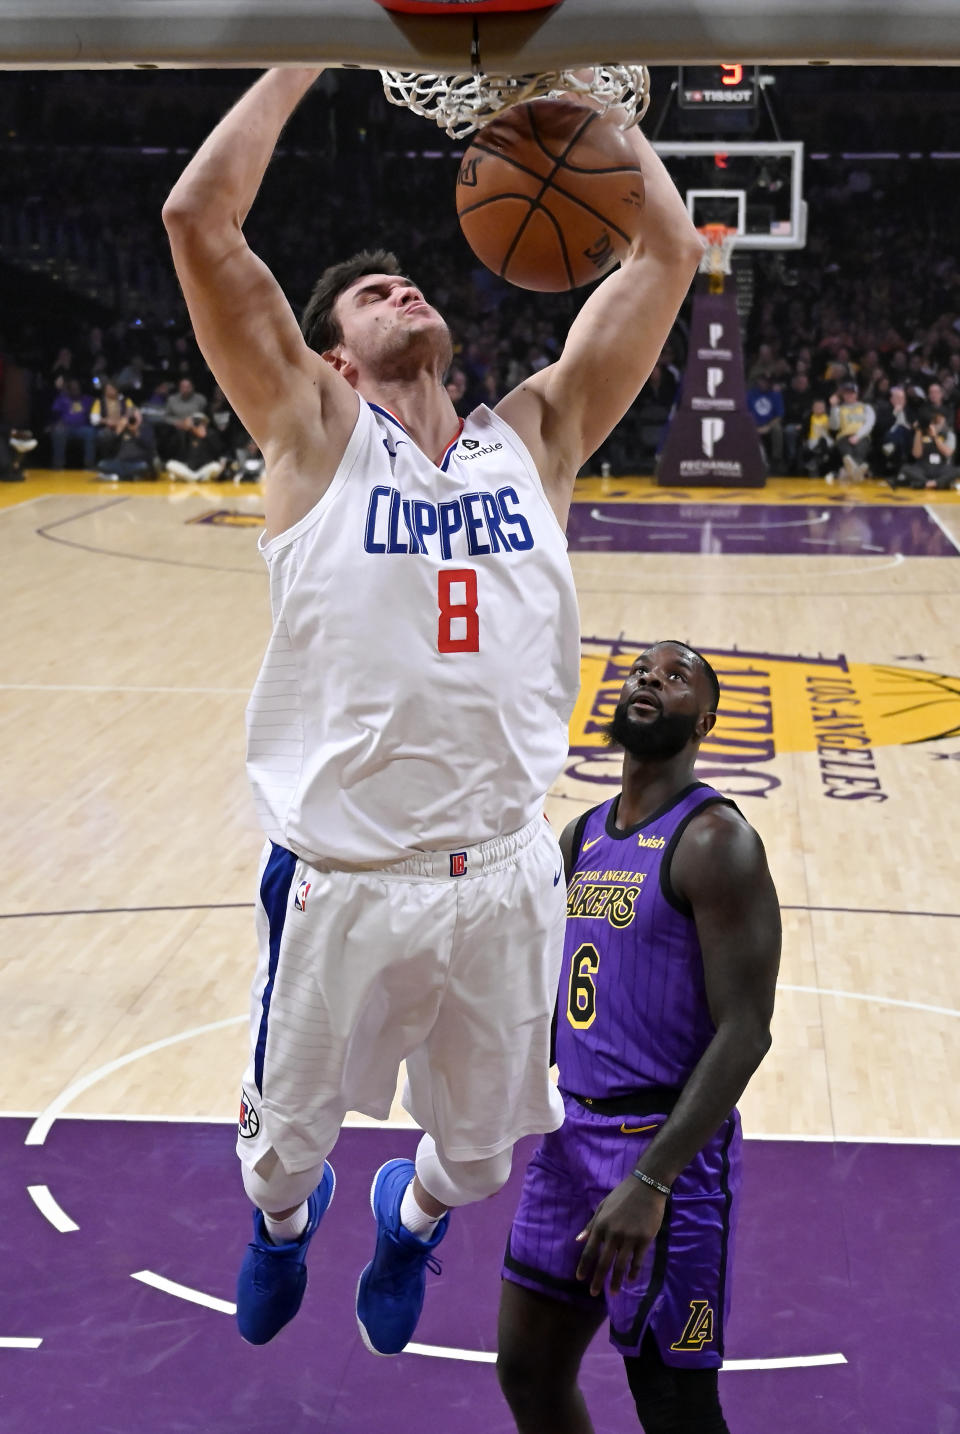 Los Angeles Clippers forward Danilo Gallinari dunks as Los Angeles Lakers guard Lance Stephenson watches during the first half of an NBA basketball game Friday, Dec. 28, 2018, in Los Angeles. (AP Photo/Mark J. Terrill)